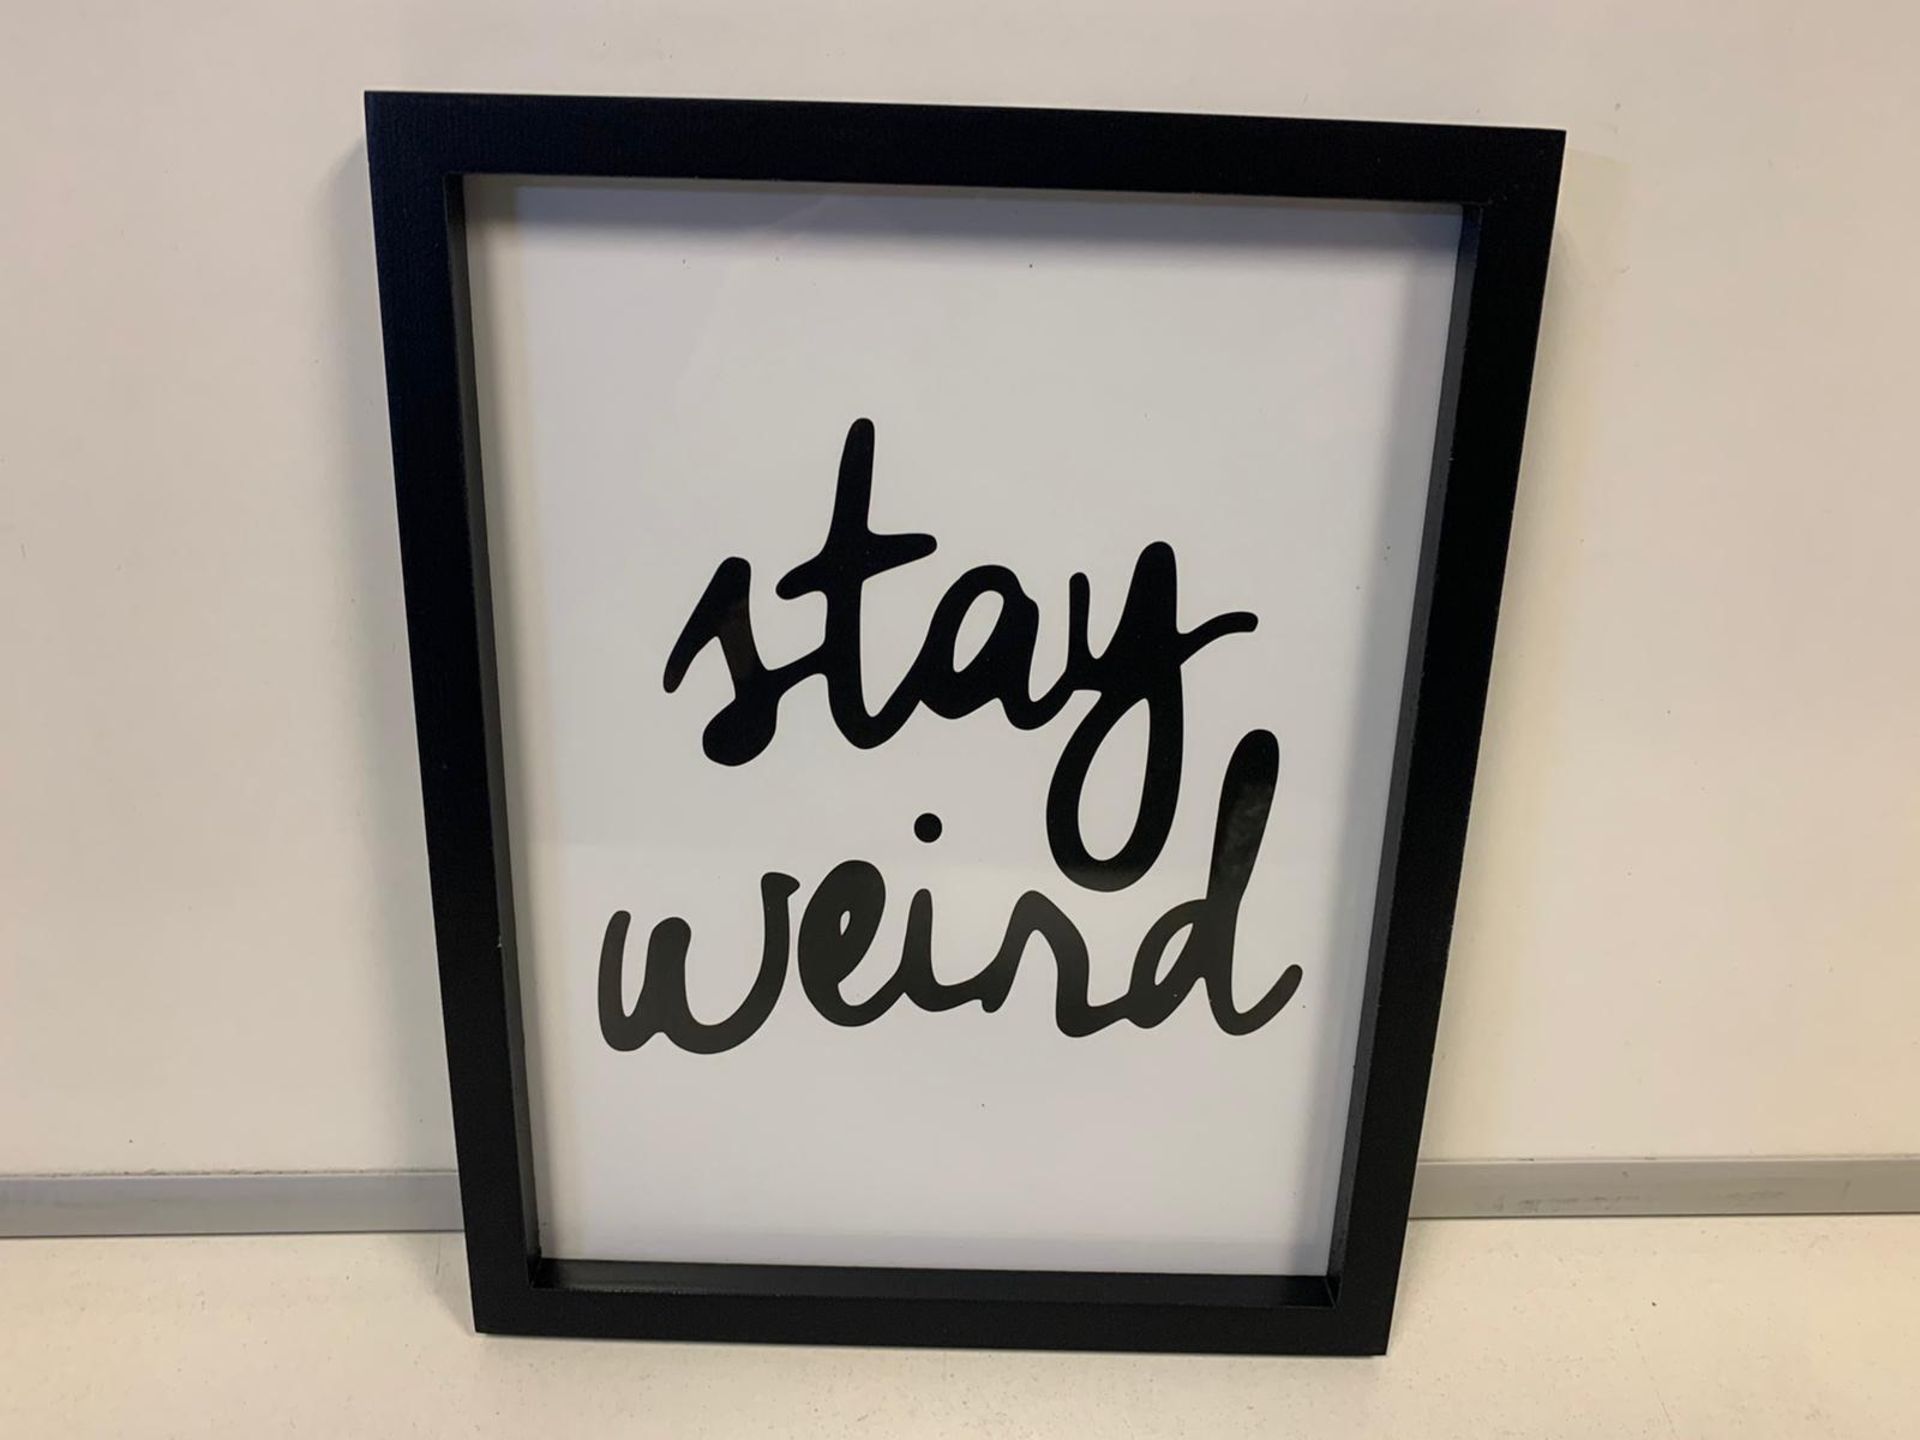 30 X BRAND NEW BOXED STAY WEIRD FRAMED ARTWORK IN 5 BOXES